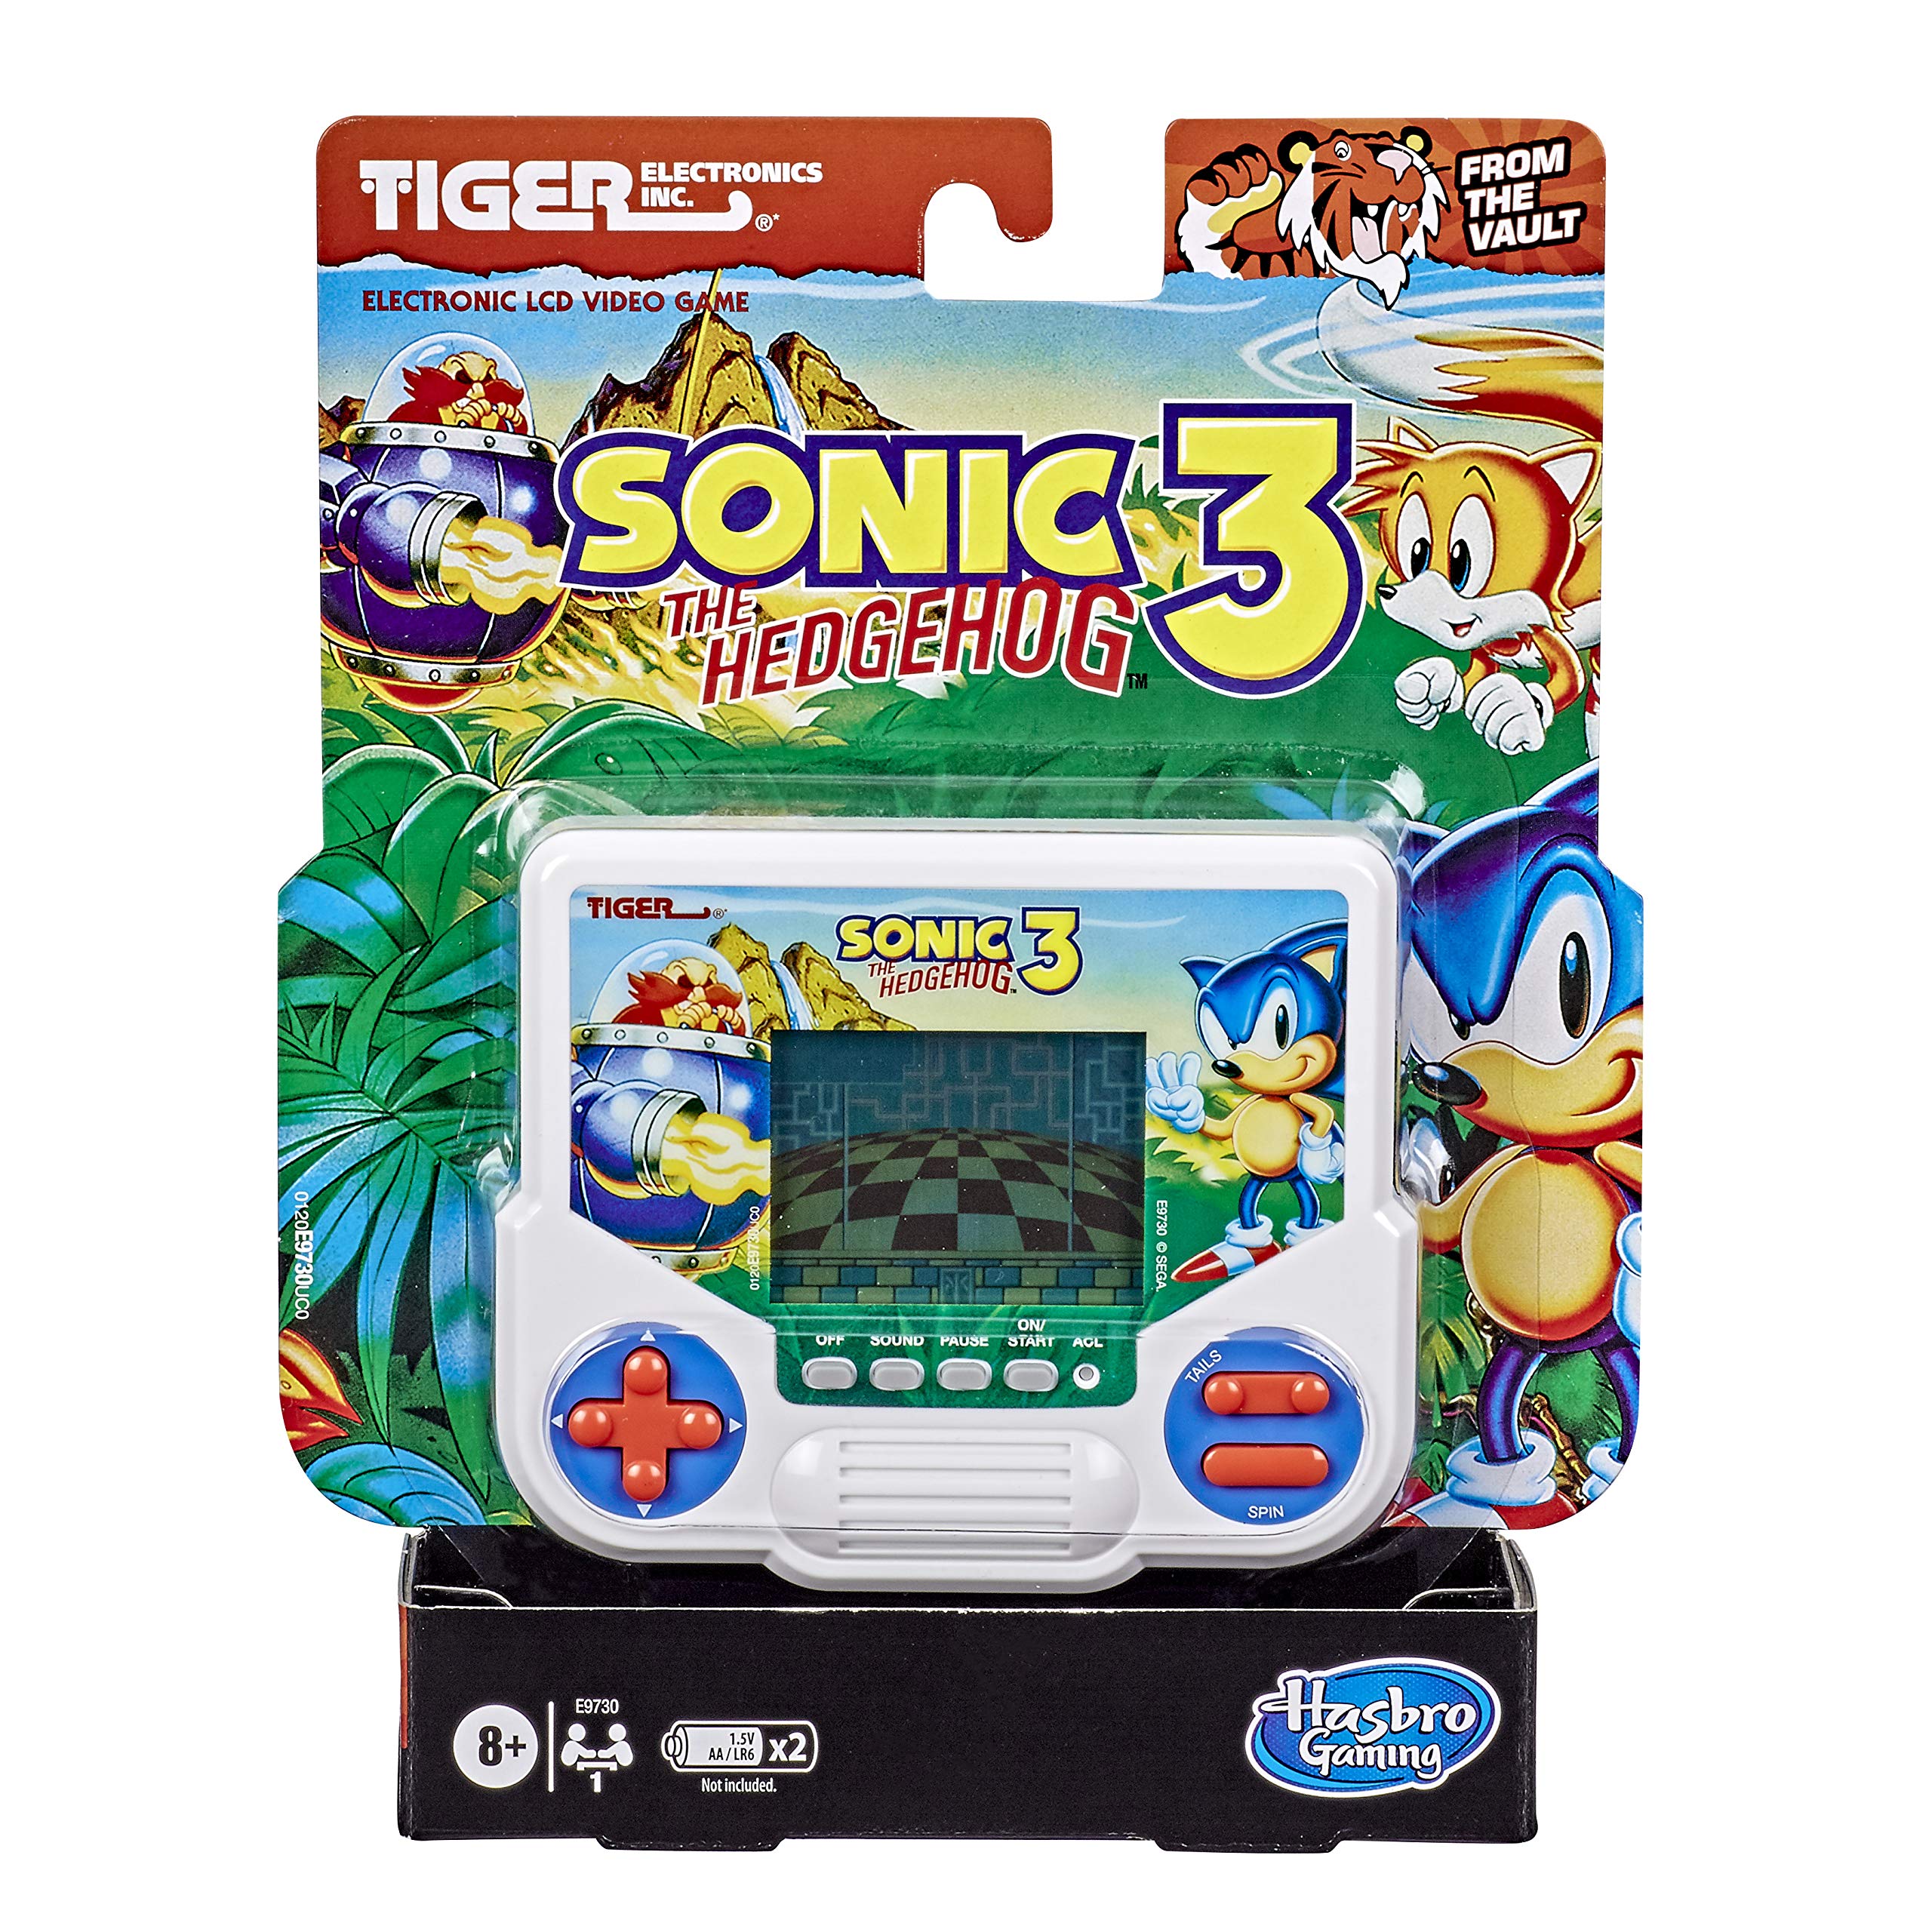 Hasbro Gaming Tiger Sonic The Hedgehog 3 Electronic LCD Video Game, Retro-Inspired Edition, Handheld 1-Player, Ages 8 and Up